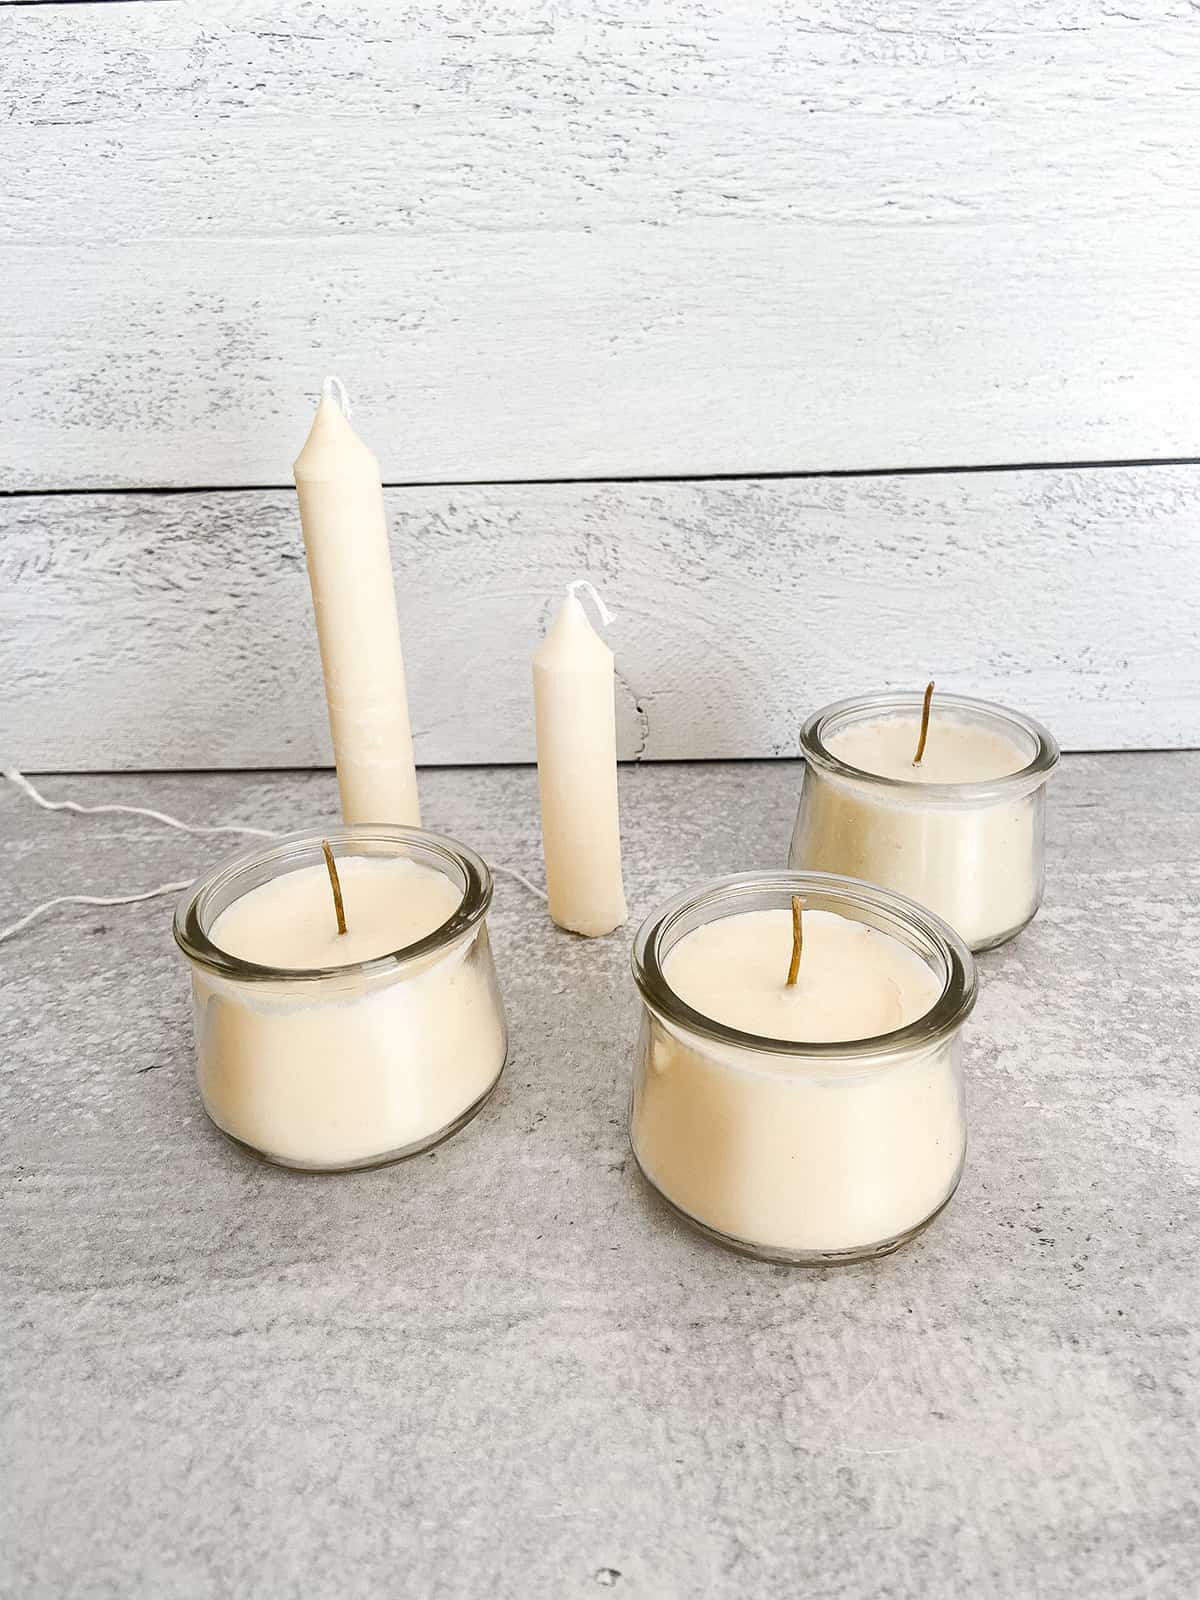 How to make tallow candles with essential oils